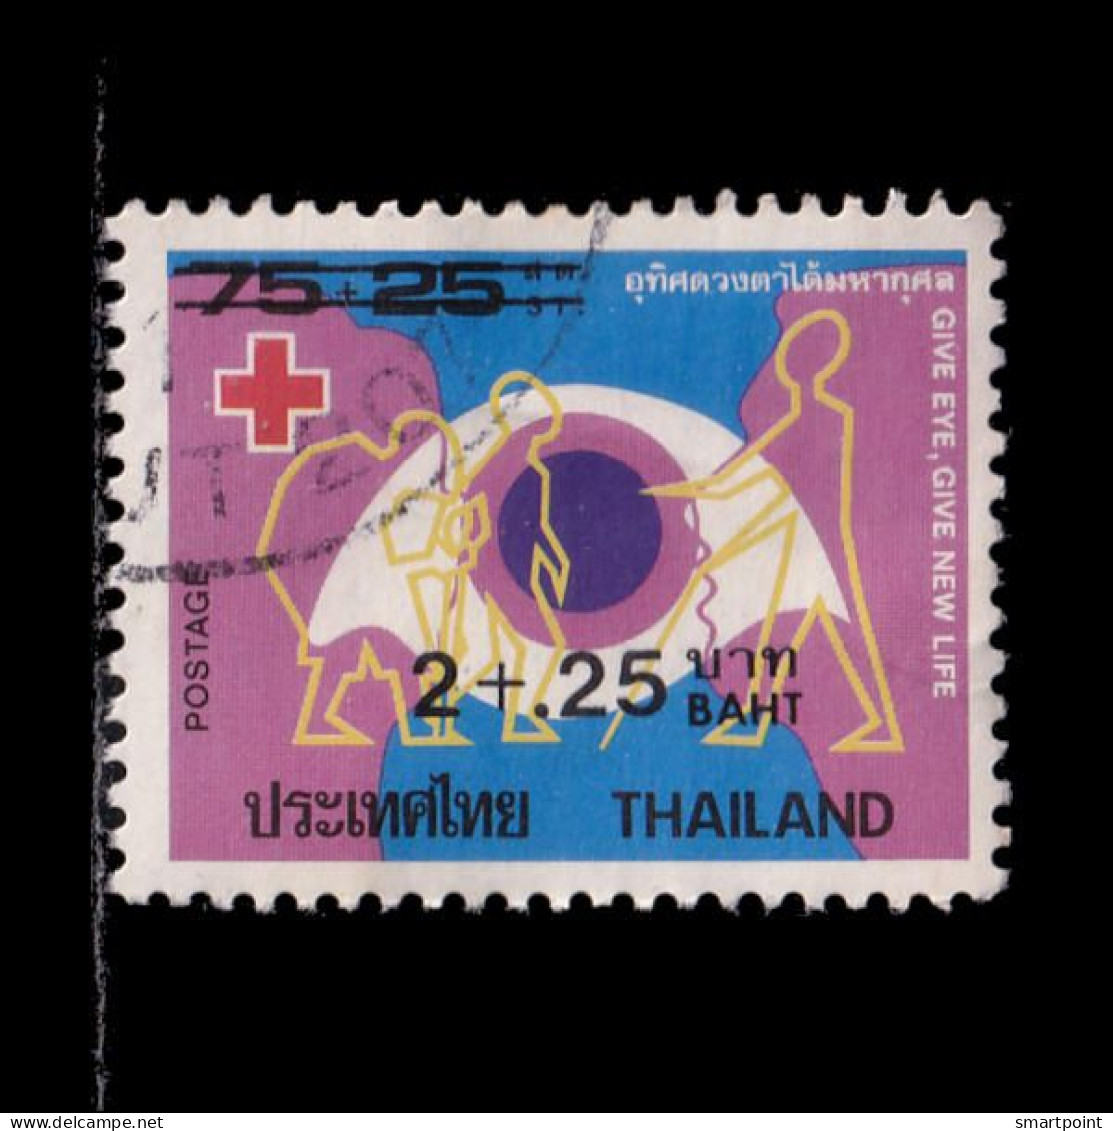 Thailand Stamp 1985 Red Cross - Used - Thailand